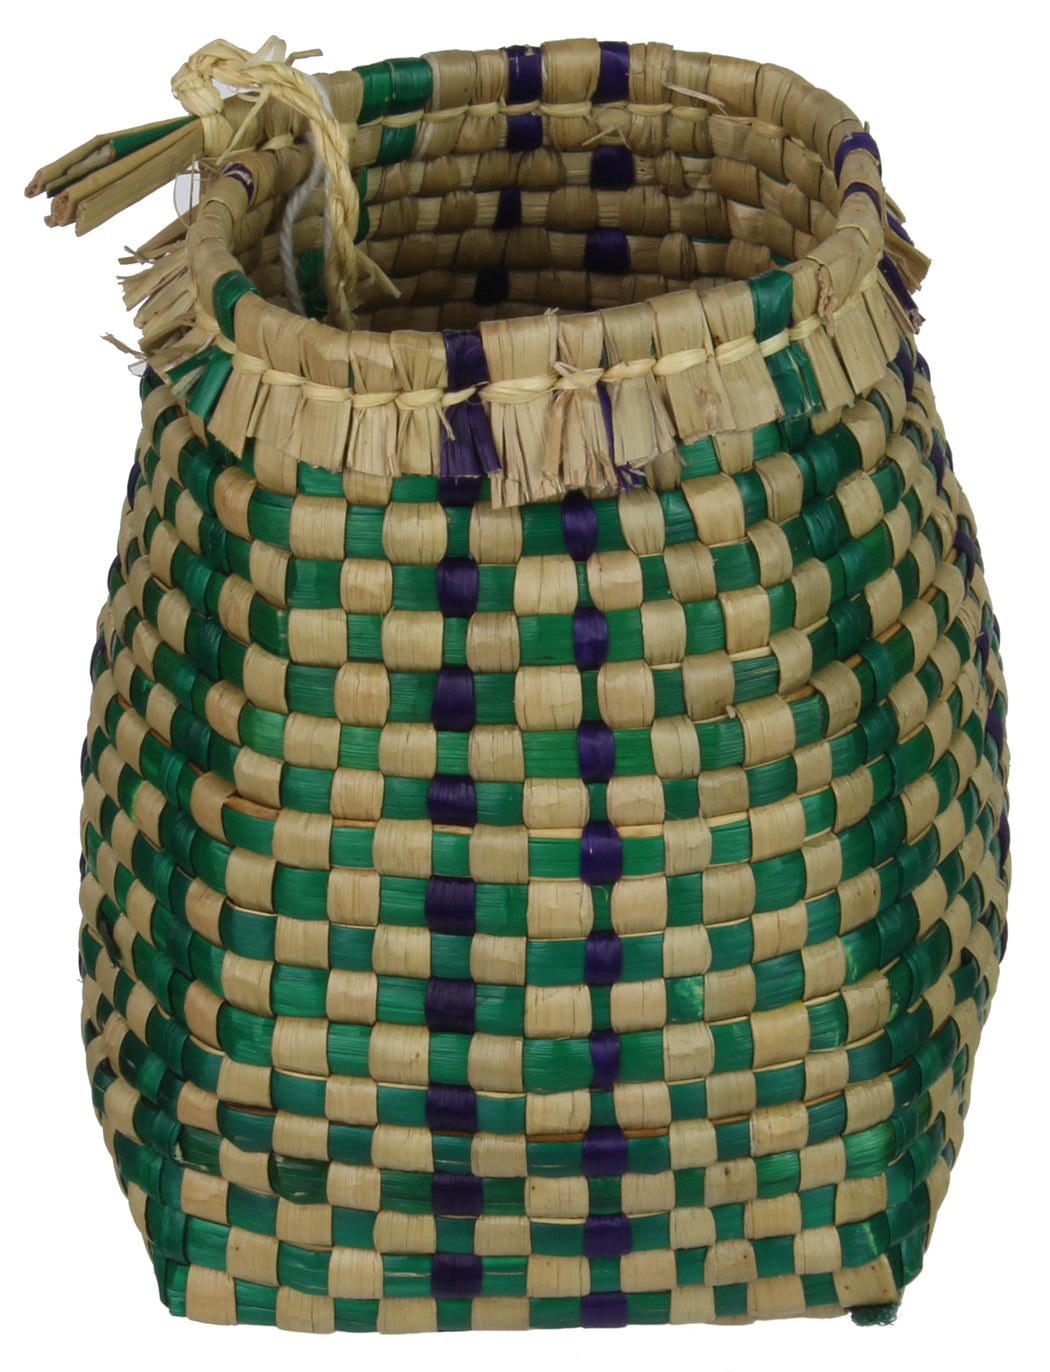 Extra Small Tote Style Basket - 4" x 3" - Niger Bend